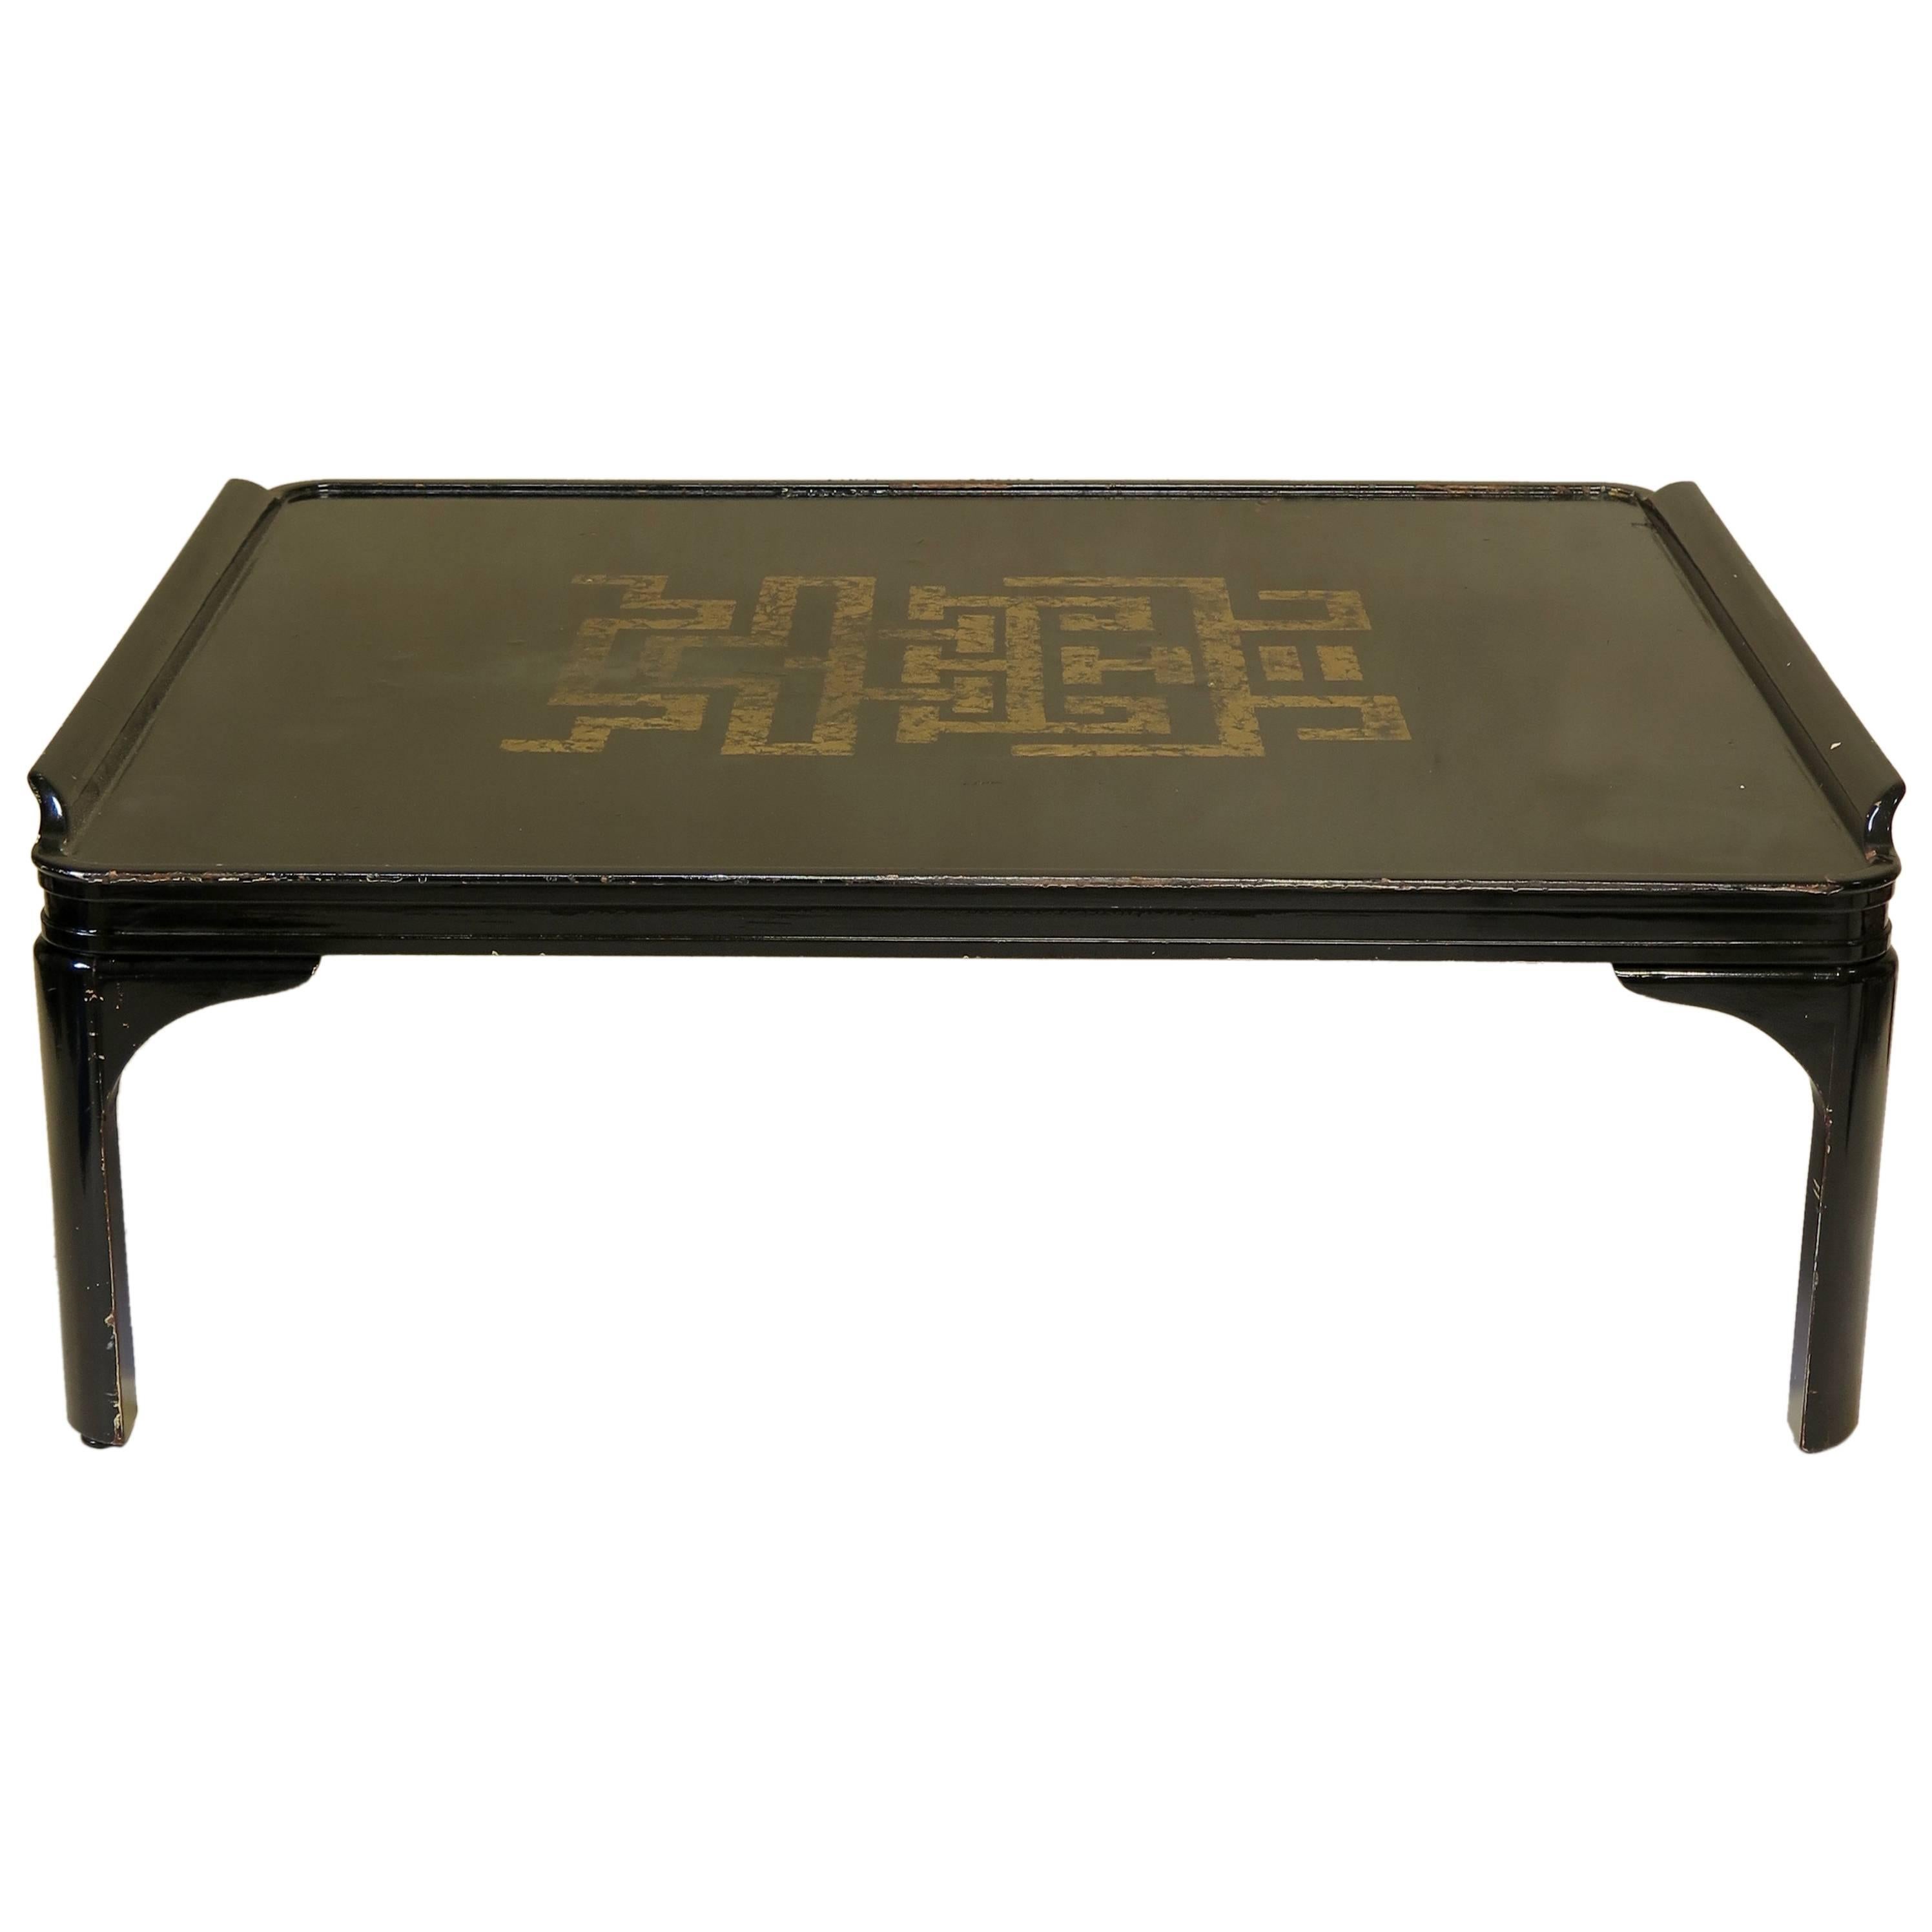 Large Square Chinese Art Deco Style Coffee Table, circa 1940s For Sale